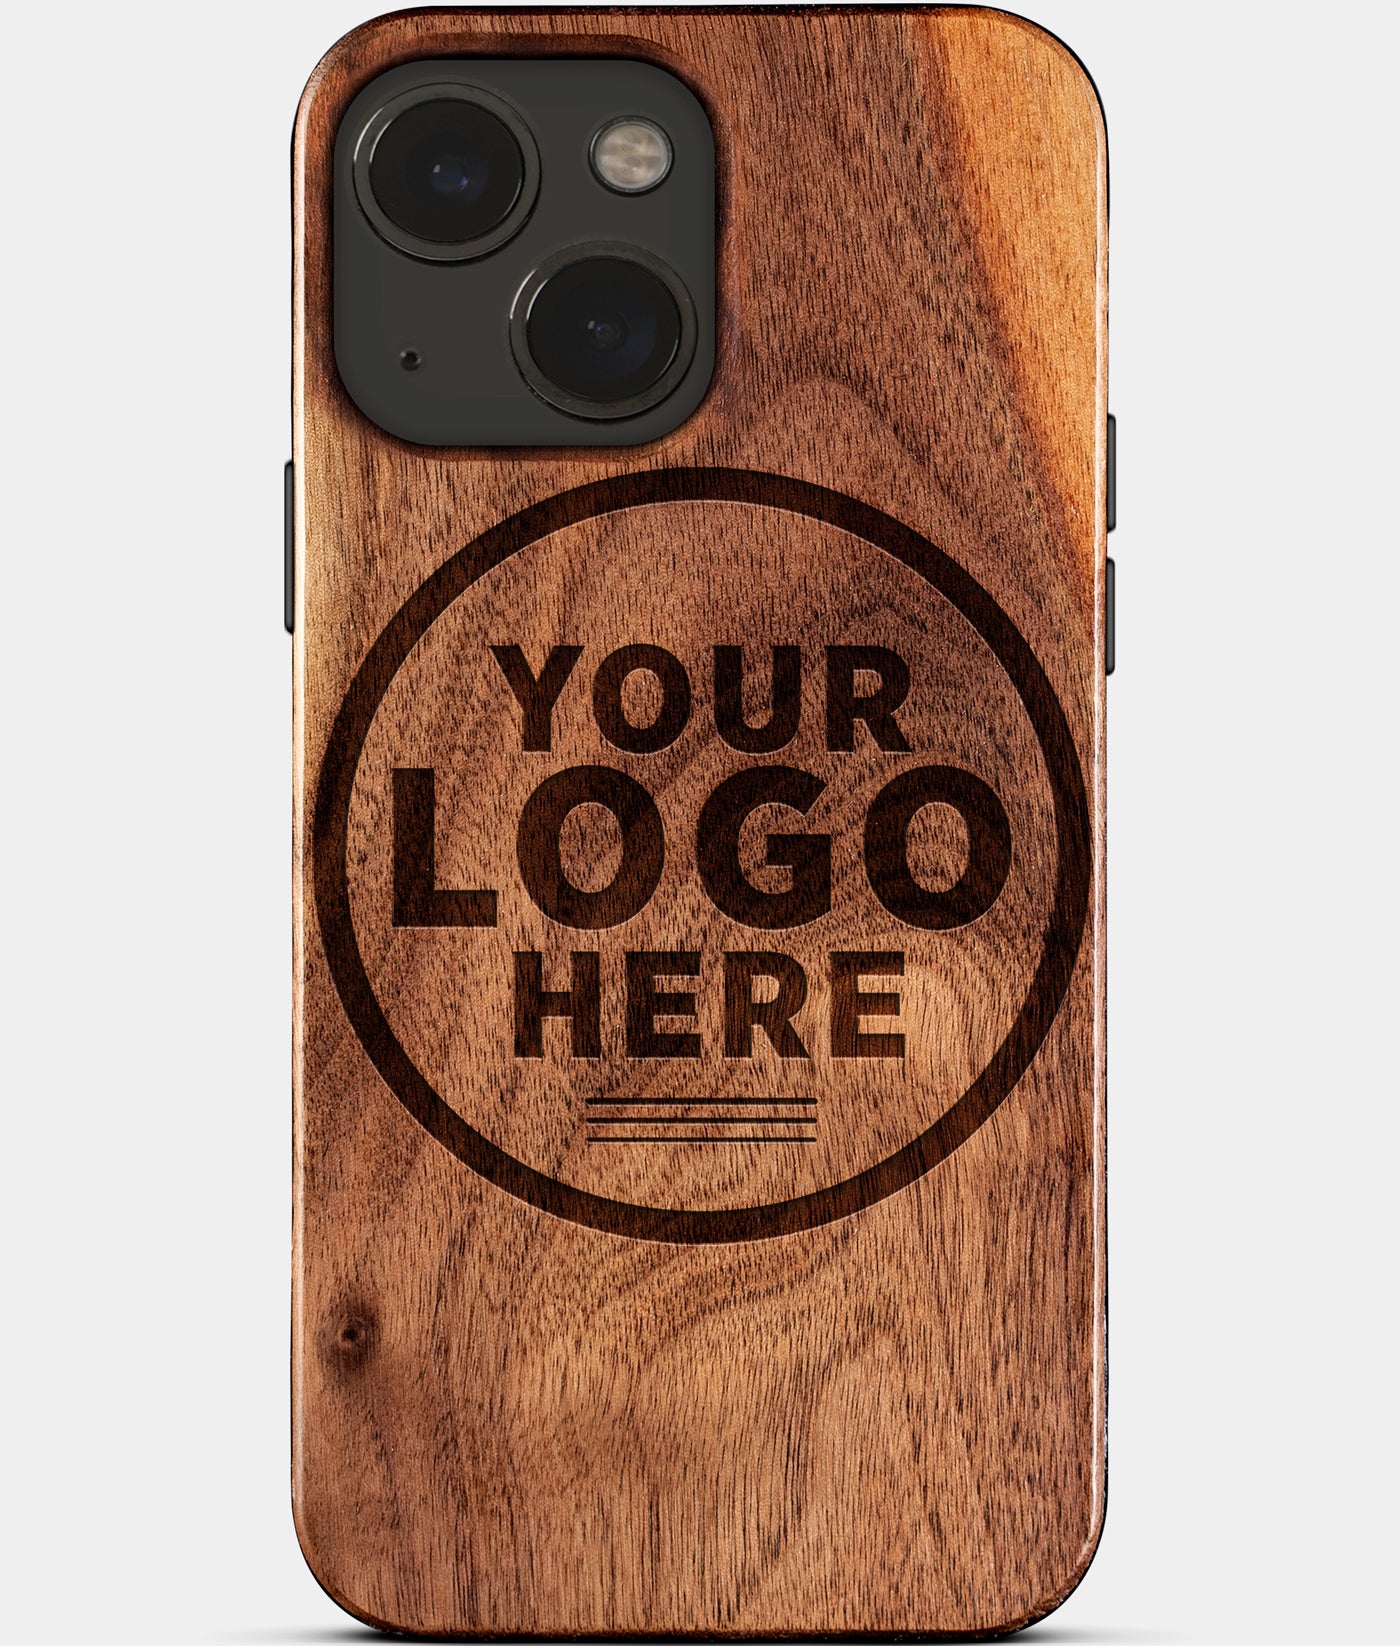 Wood iPhone 15 Plus Covers - Best Anime iPhone 15 Plus Cases - Custom Anime iPhone 15 Plus Covers - Custom Anime Manga Japanese Art iPhone 15 Plus Covers - Cosplay Animation iPhone 15 Plus Cases